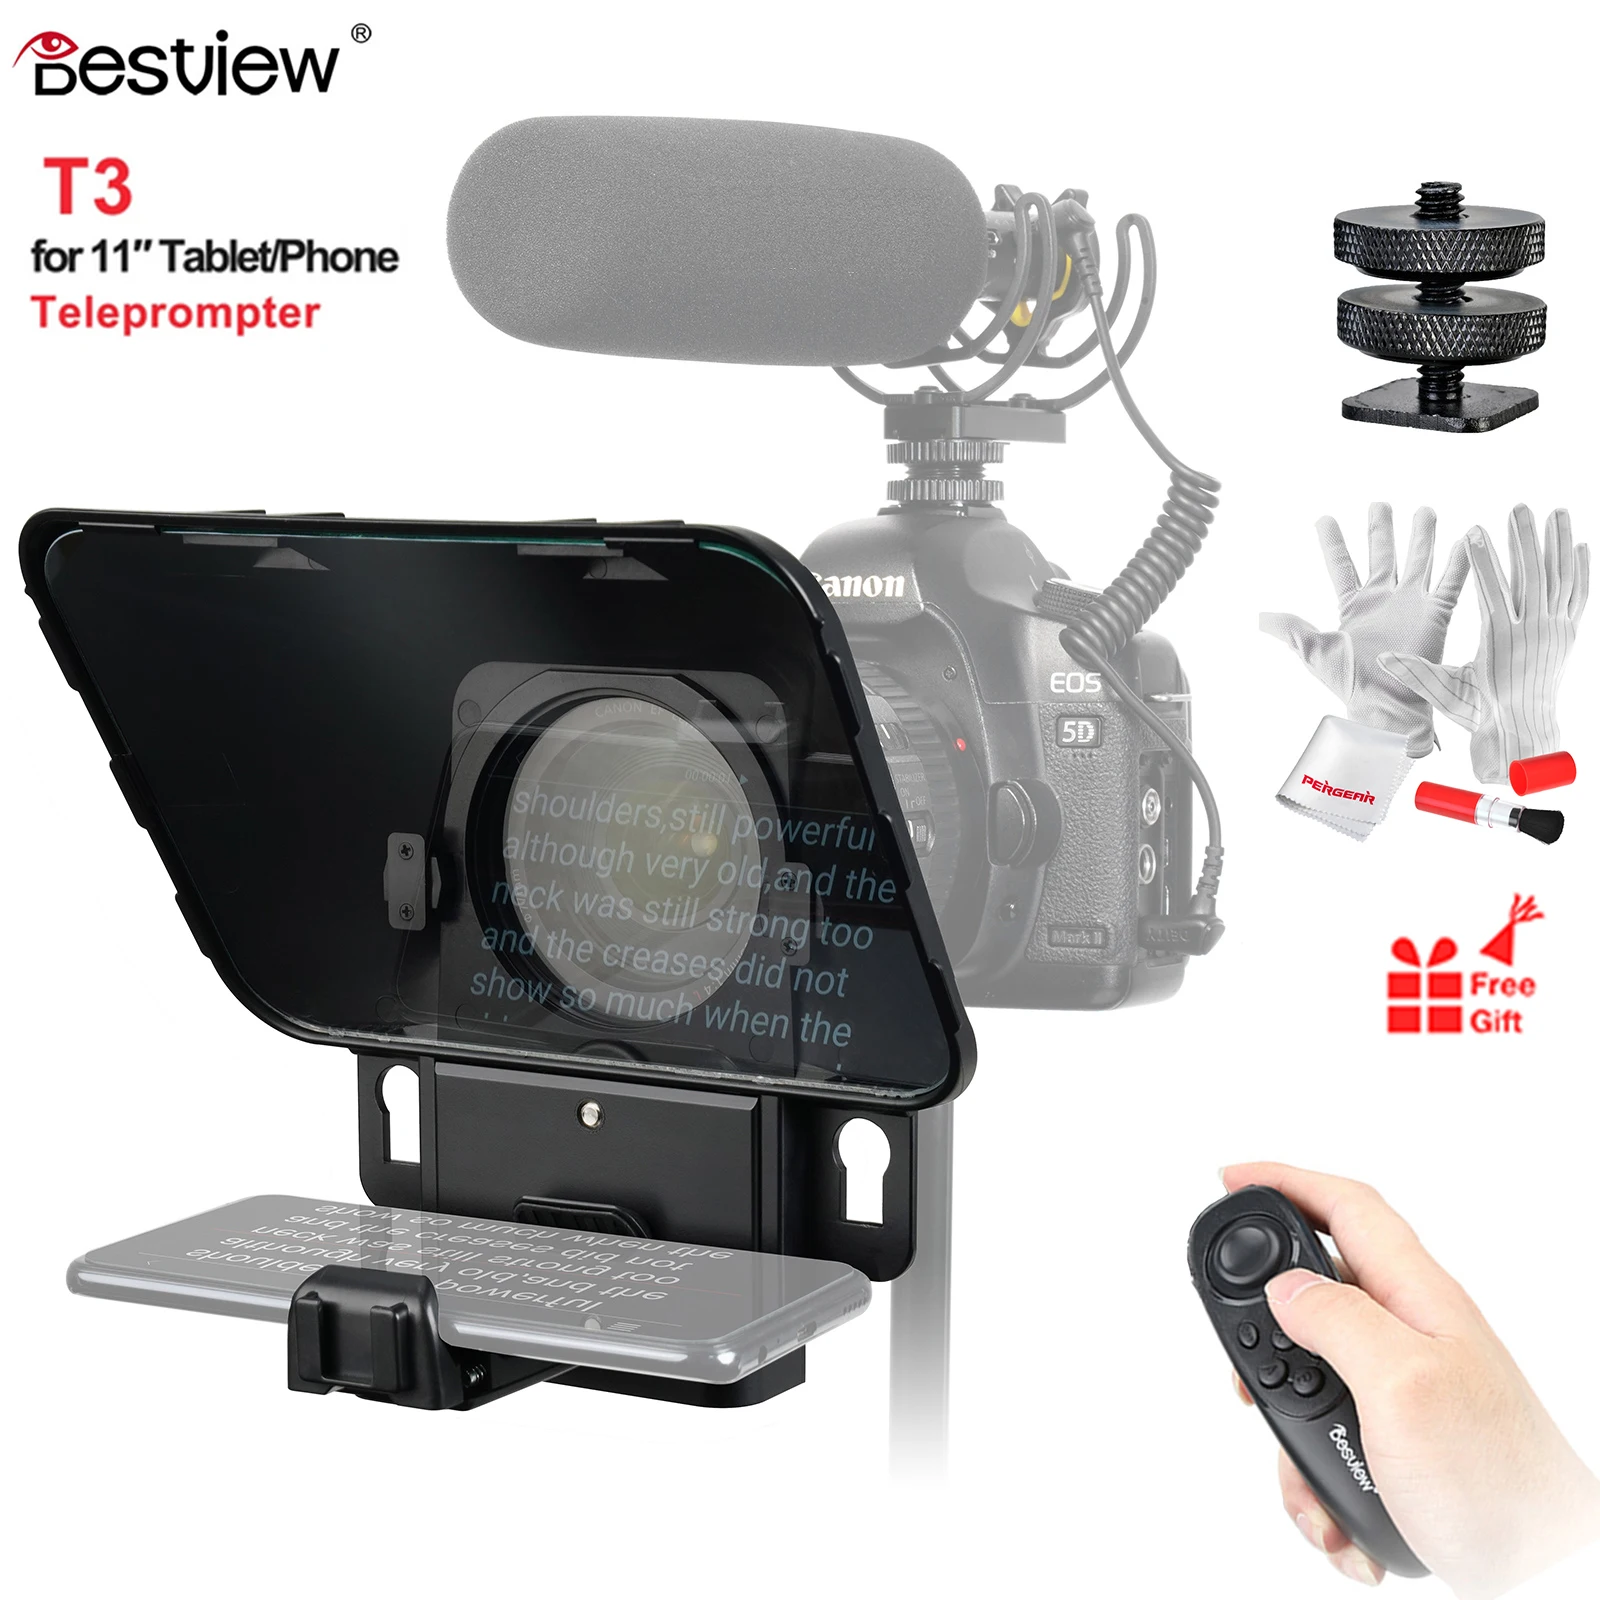 

Bestview T3 Portable Teleprompter with Remote Control for Smartphone Tablet DSLR Cameras YouTube Interview Speech Video Studio